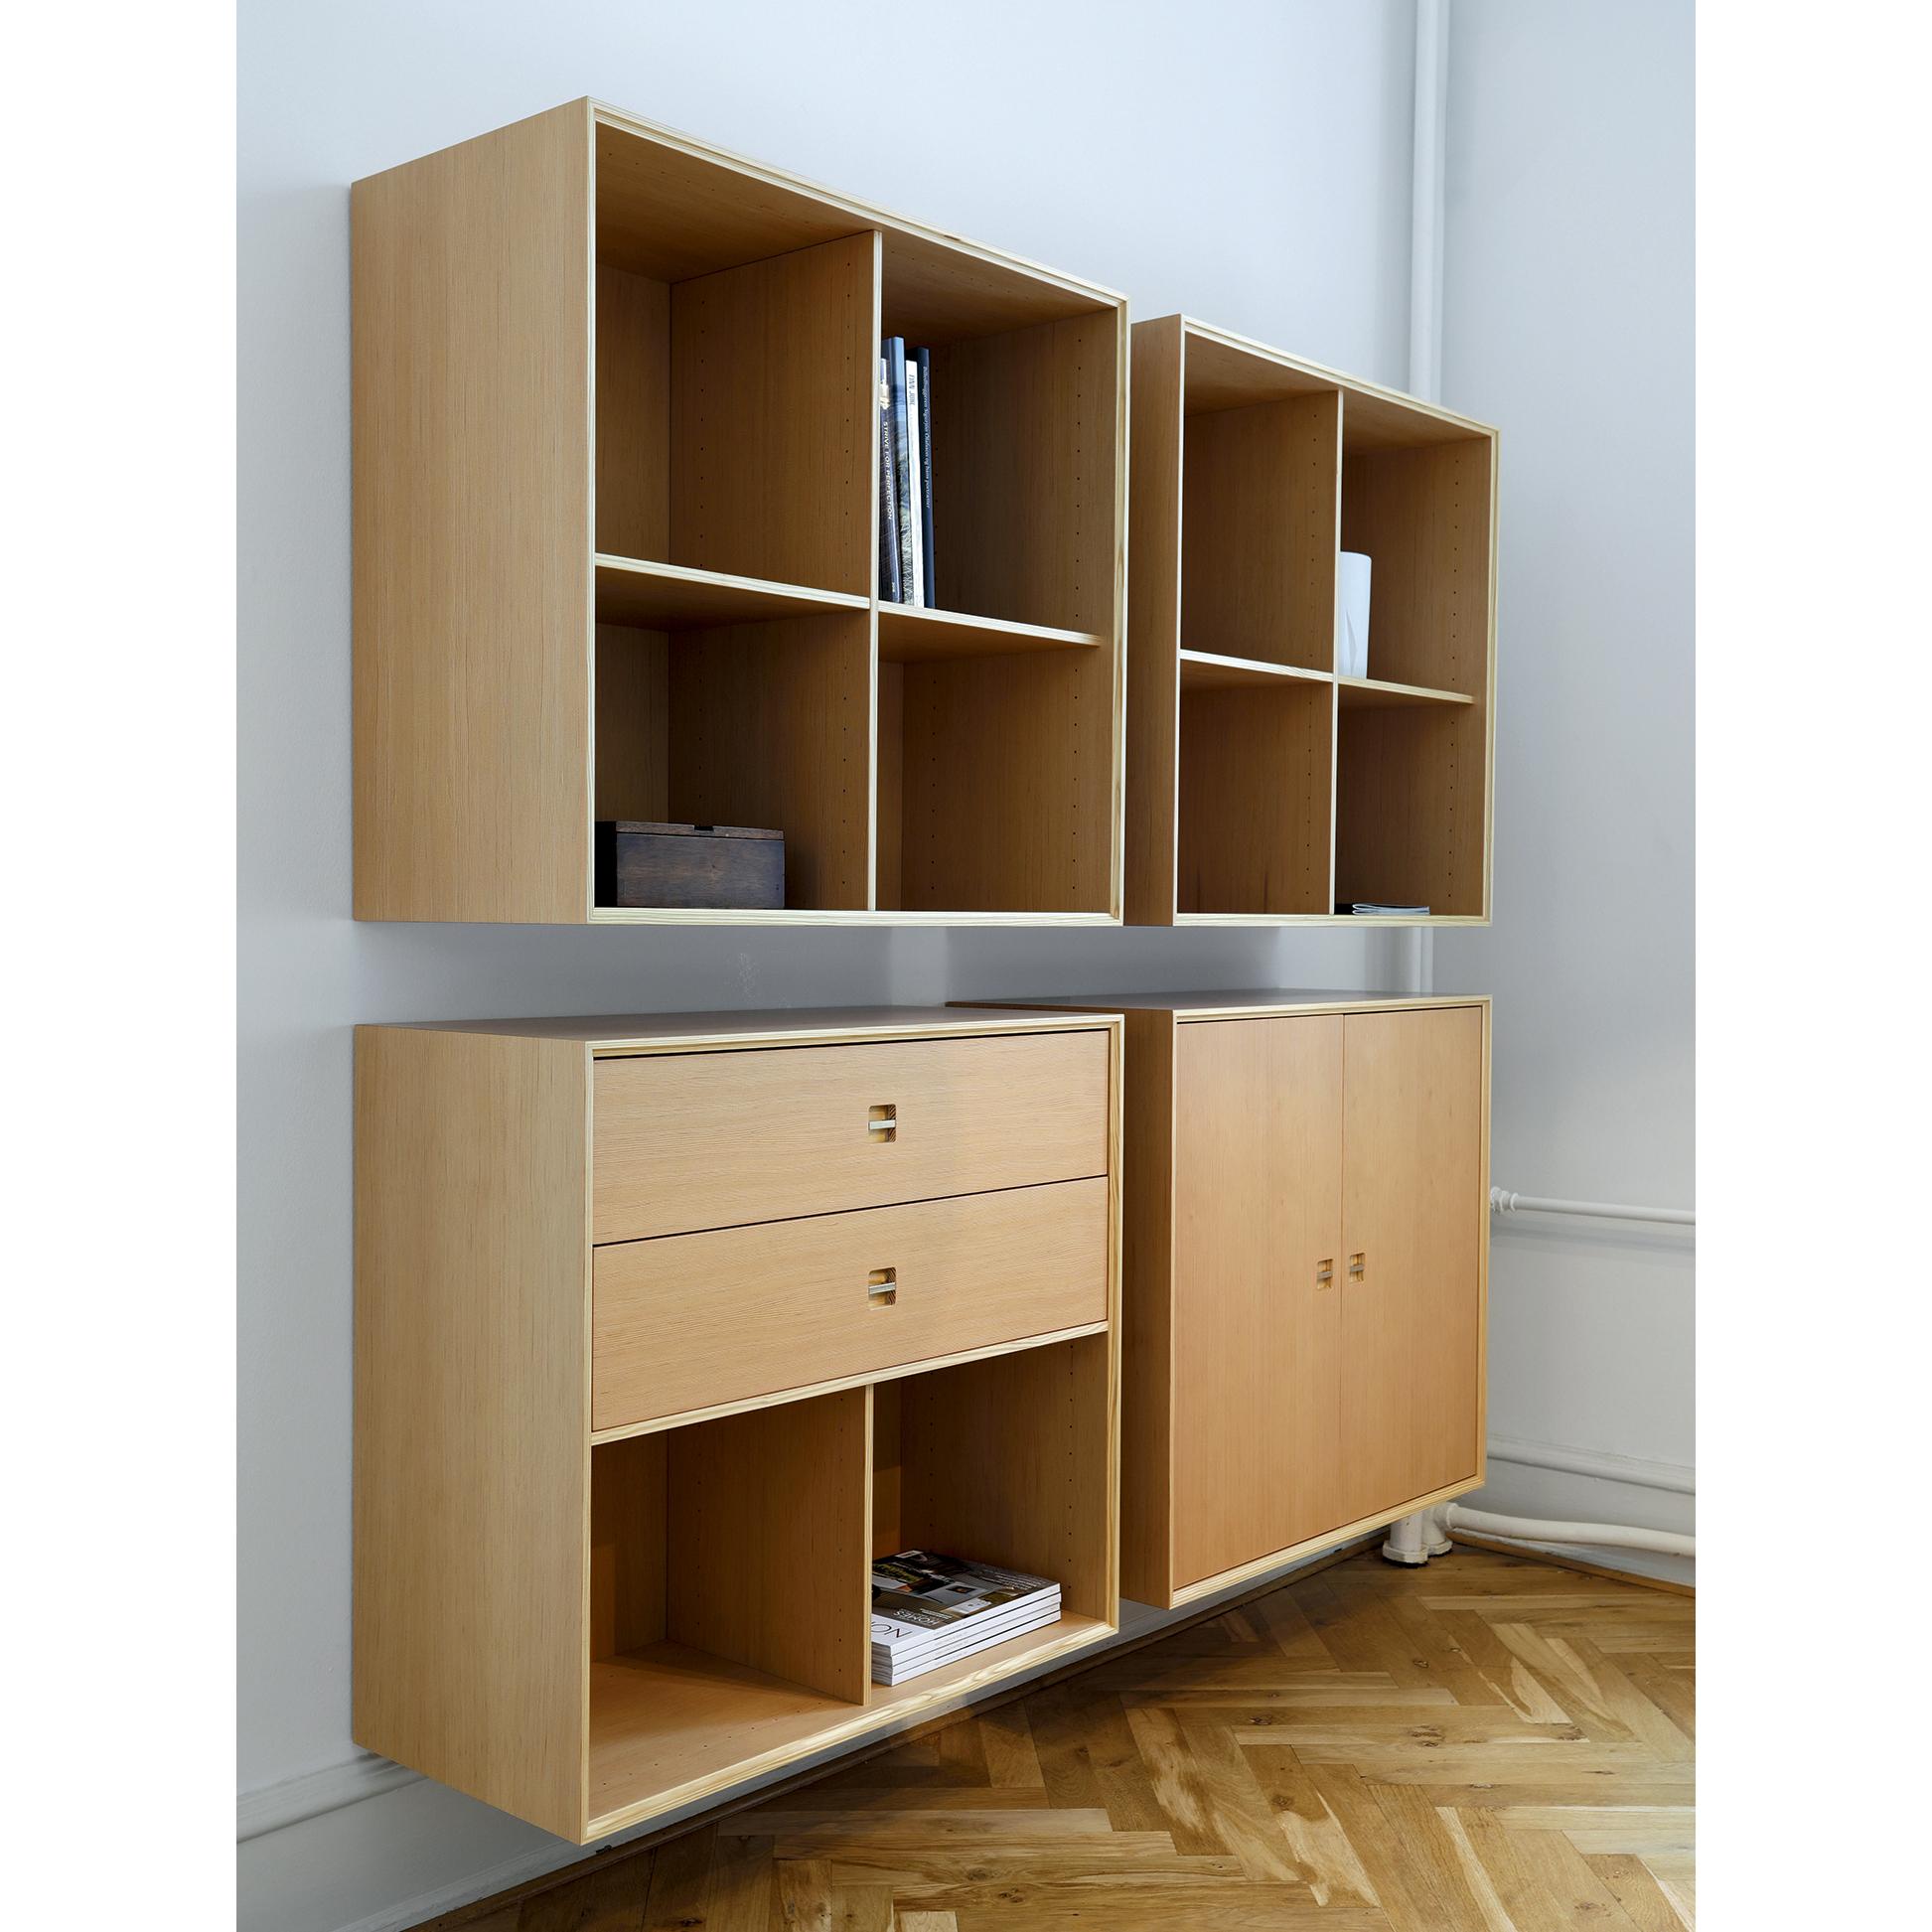 Contemporary Henrik Tengler, Classic System Storage, by One Collection